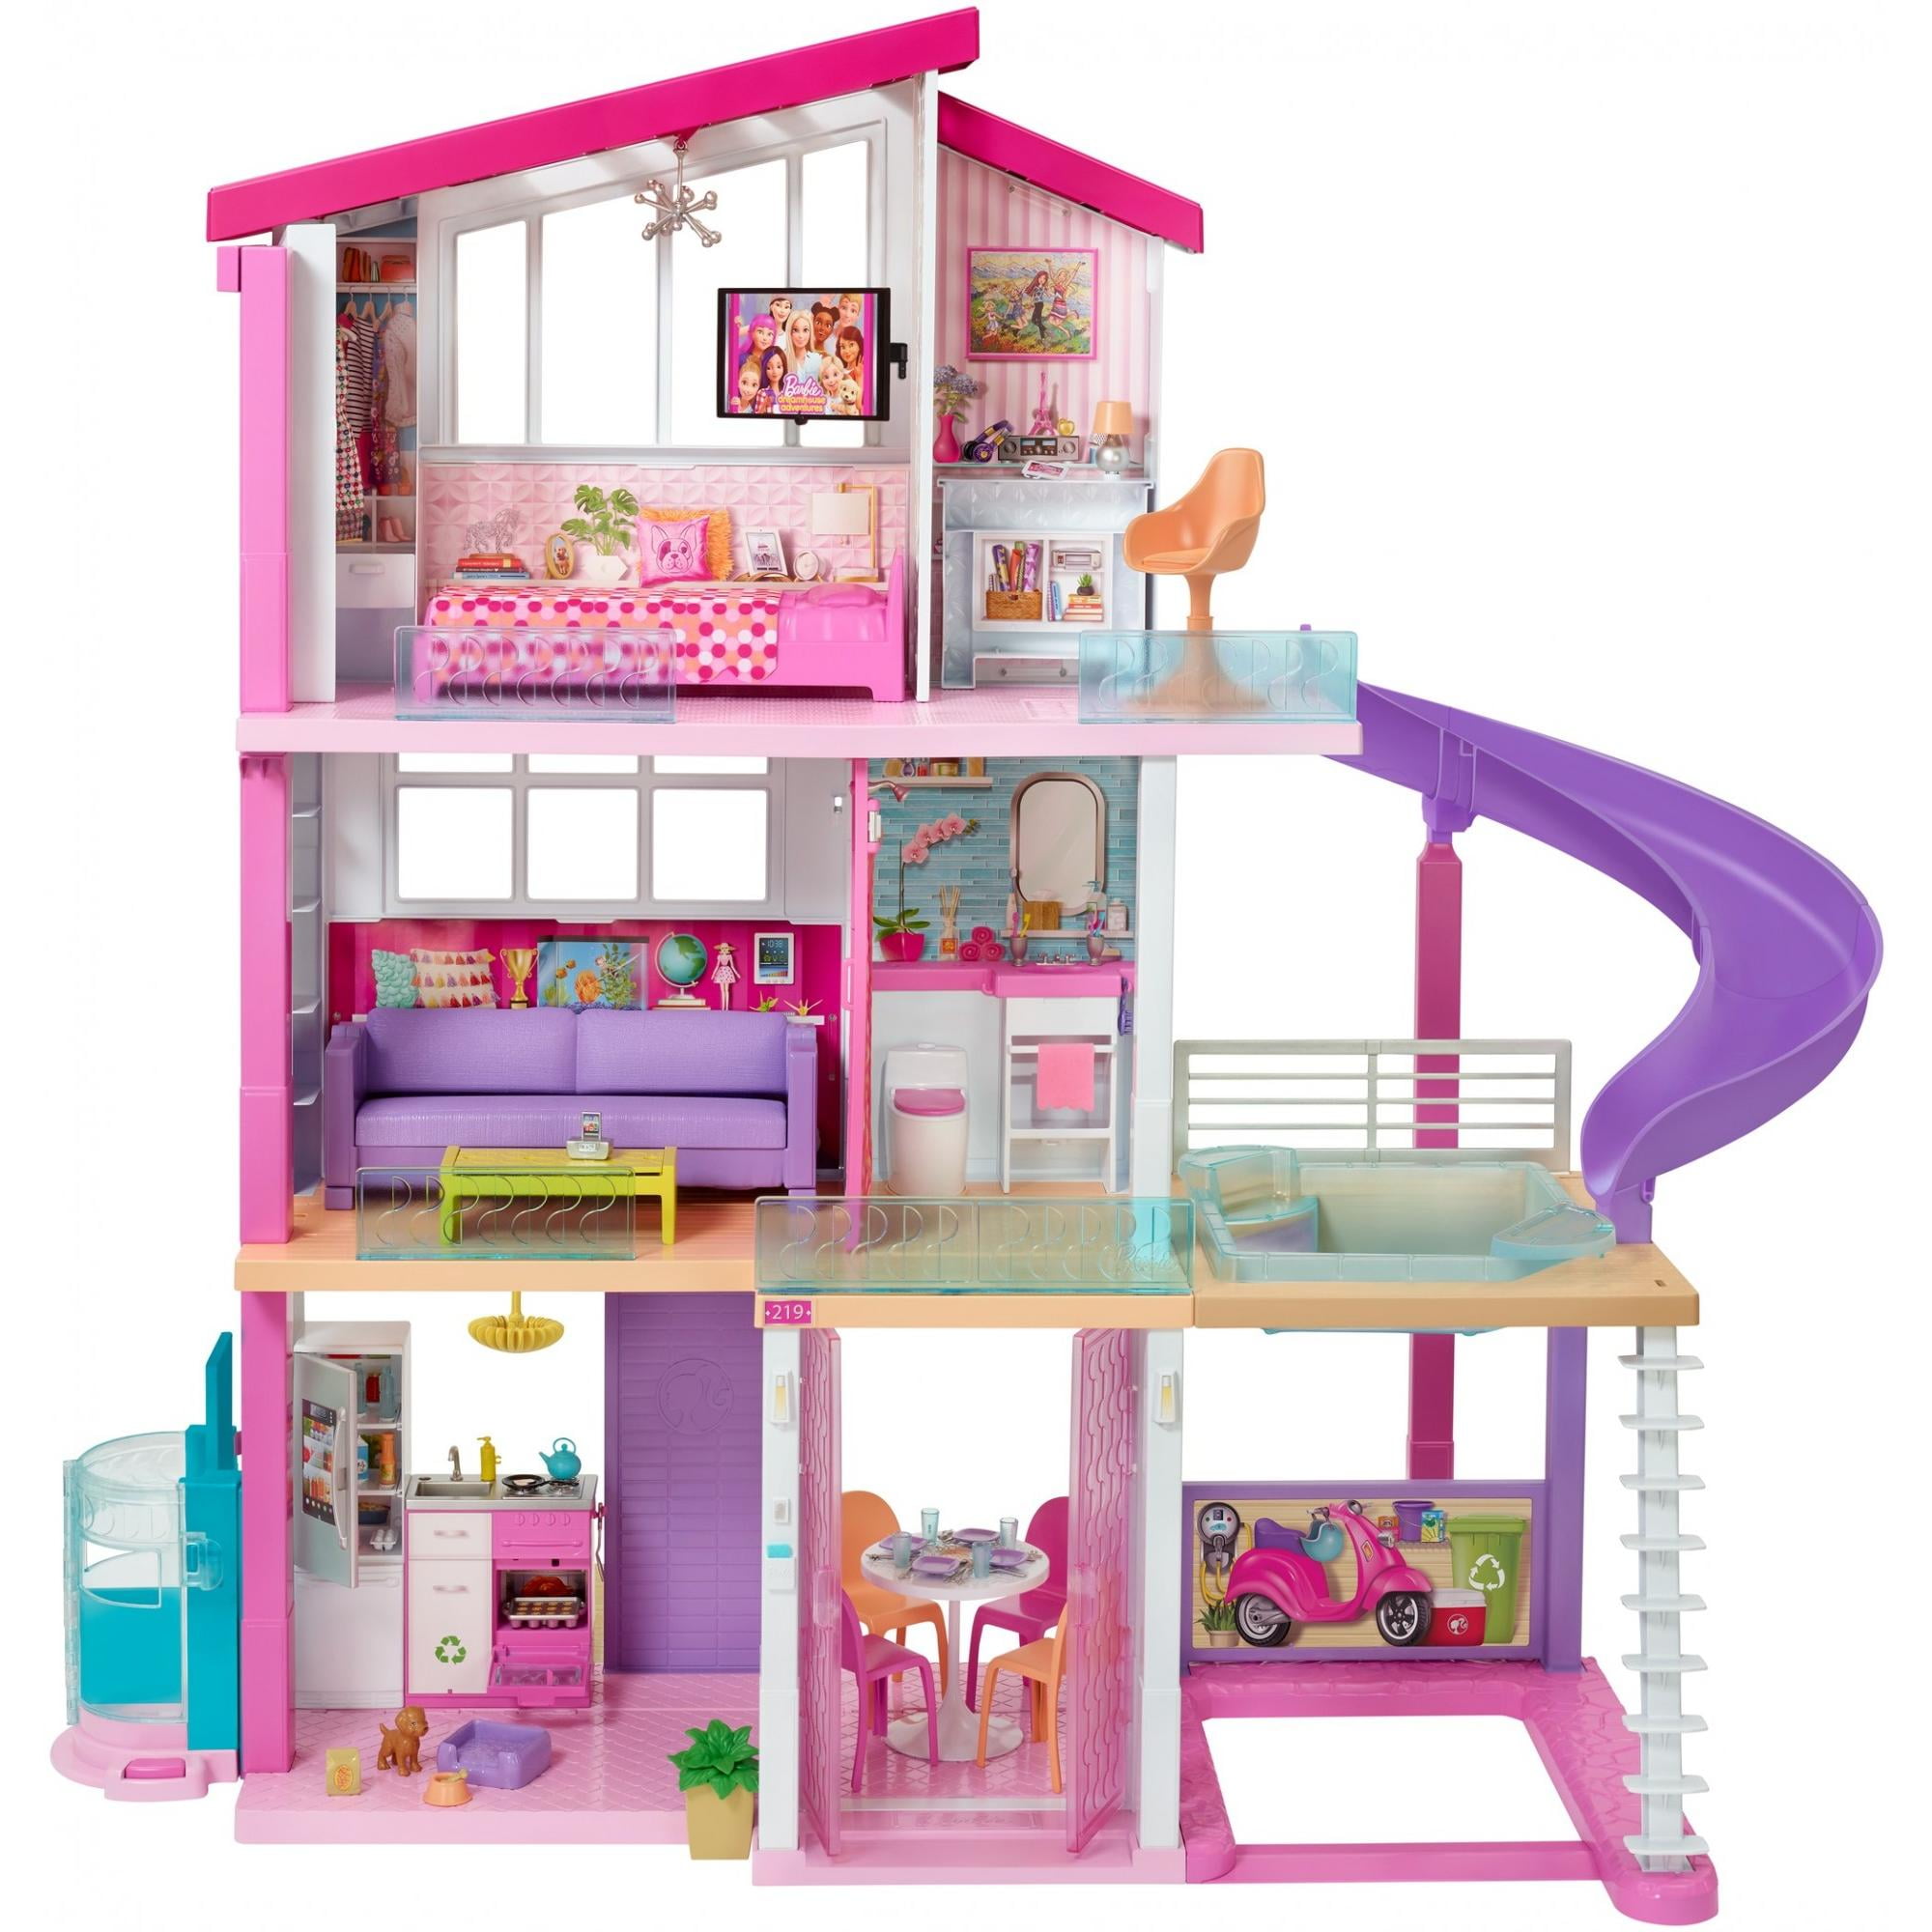 SuperModel Doll house 11 Accessories Set Barbie Kids Playhouse Toy Girls HOT NEW